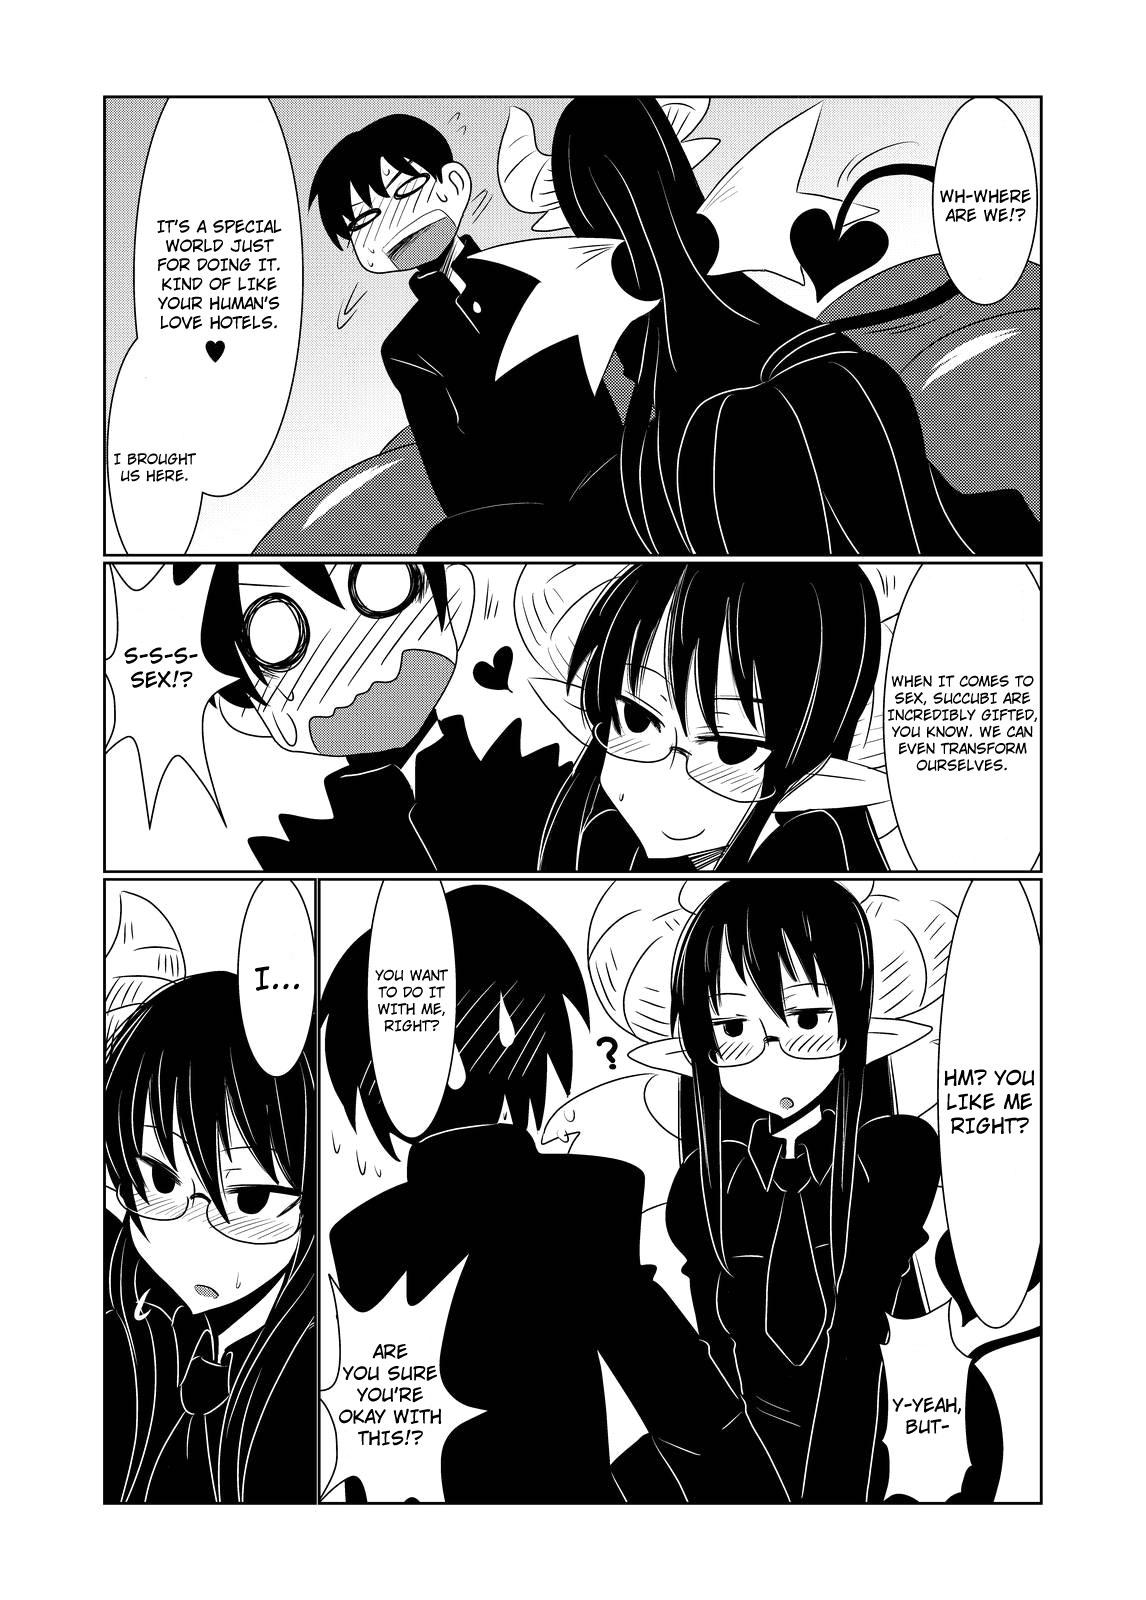 Francaise JK Succubus no Renai Jijou. | Thoughts on Love by a Female High School Succubus Storyline - Page 8